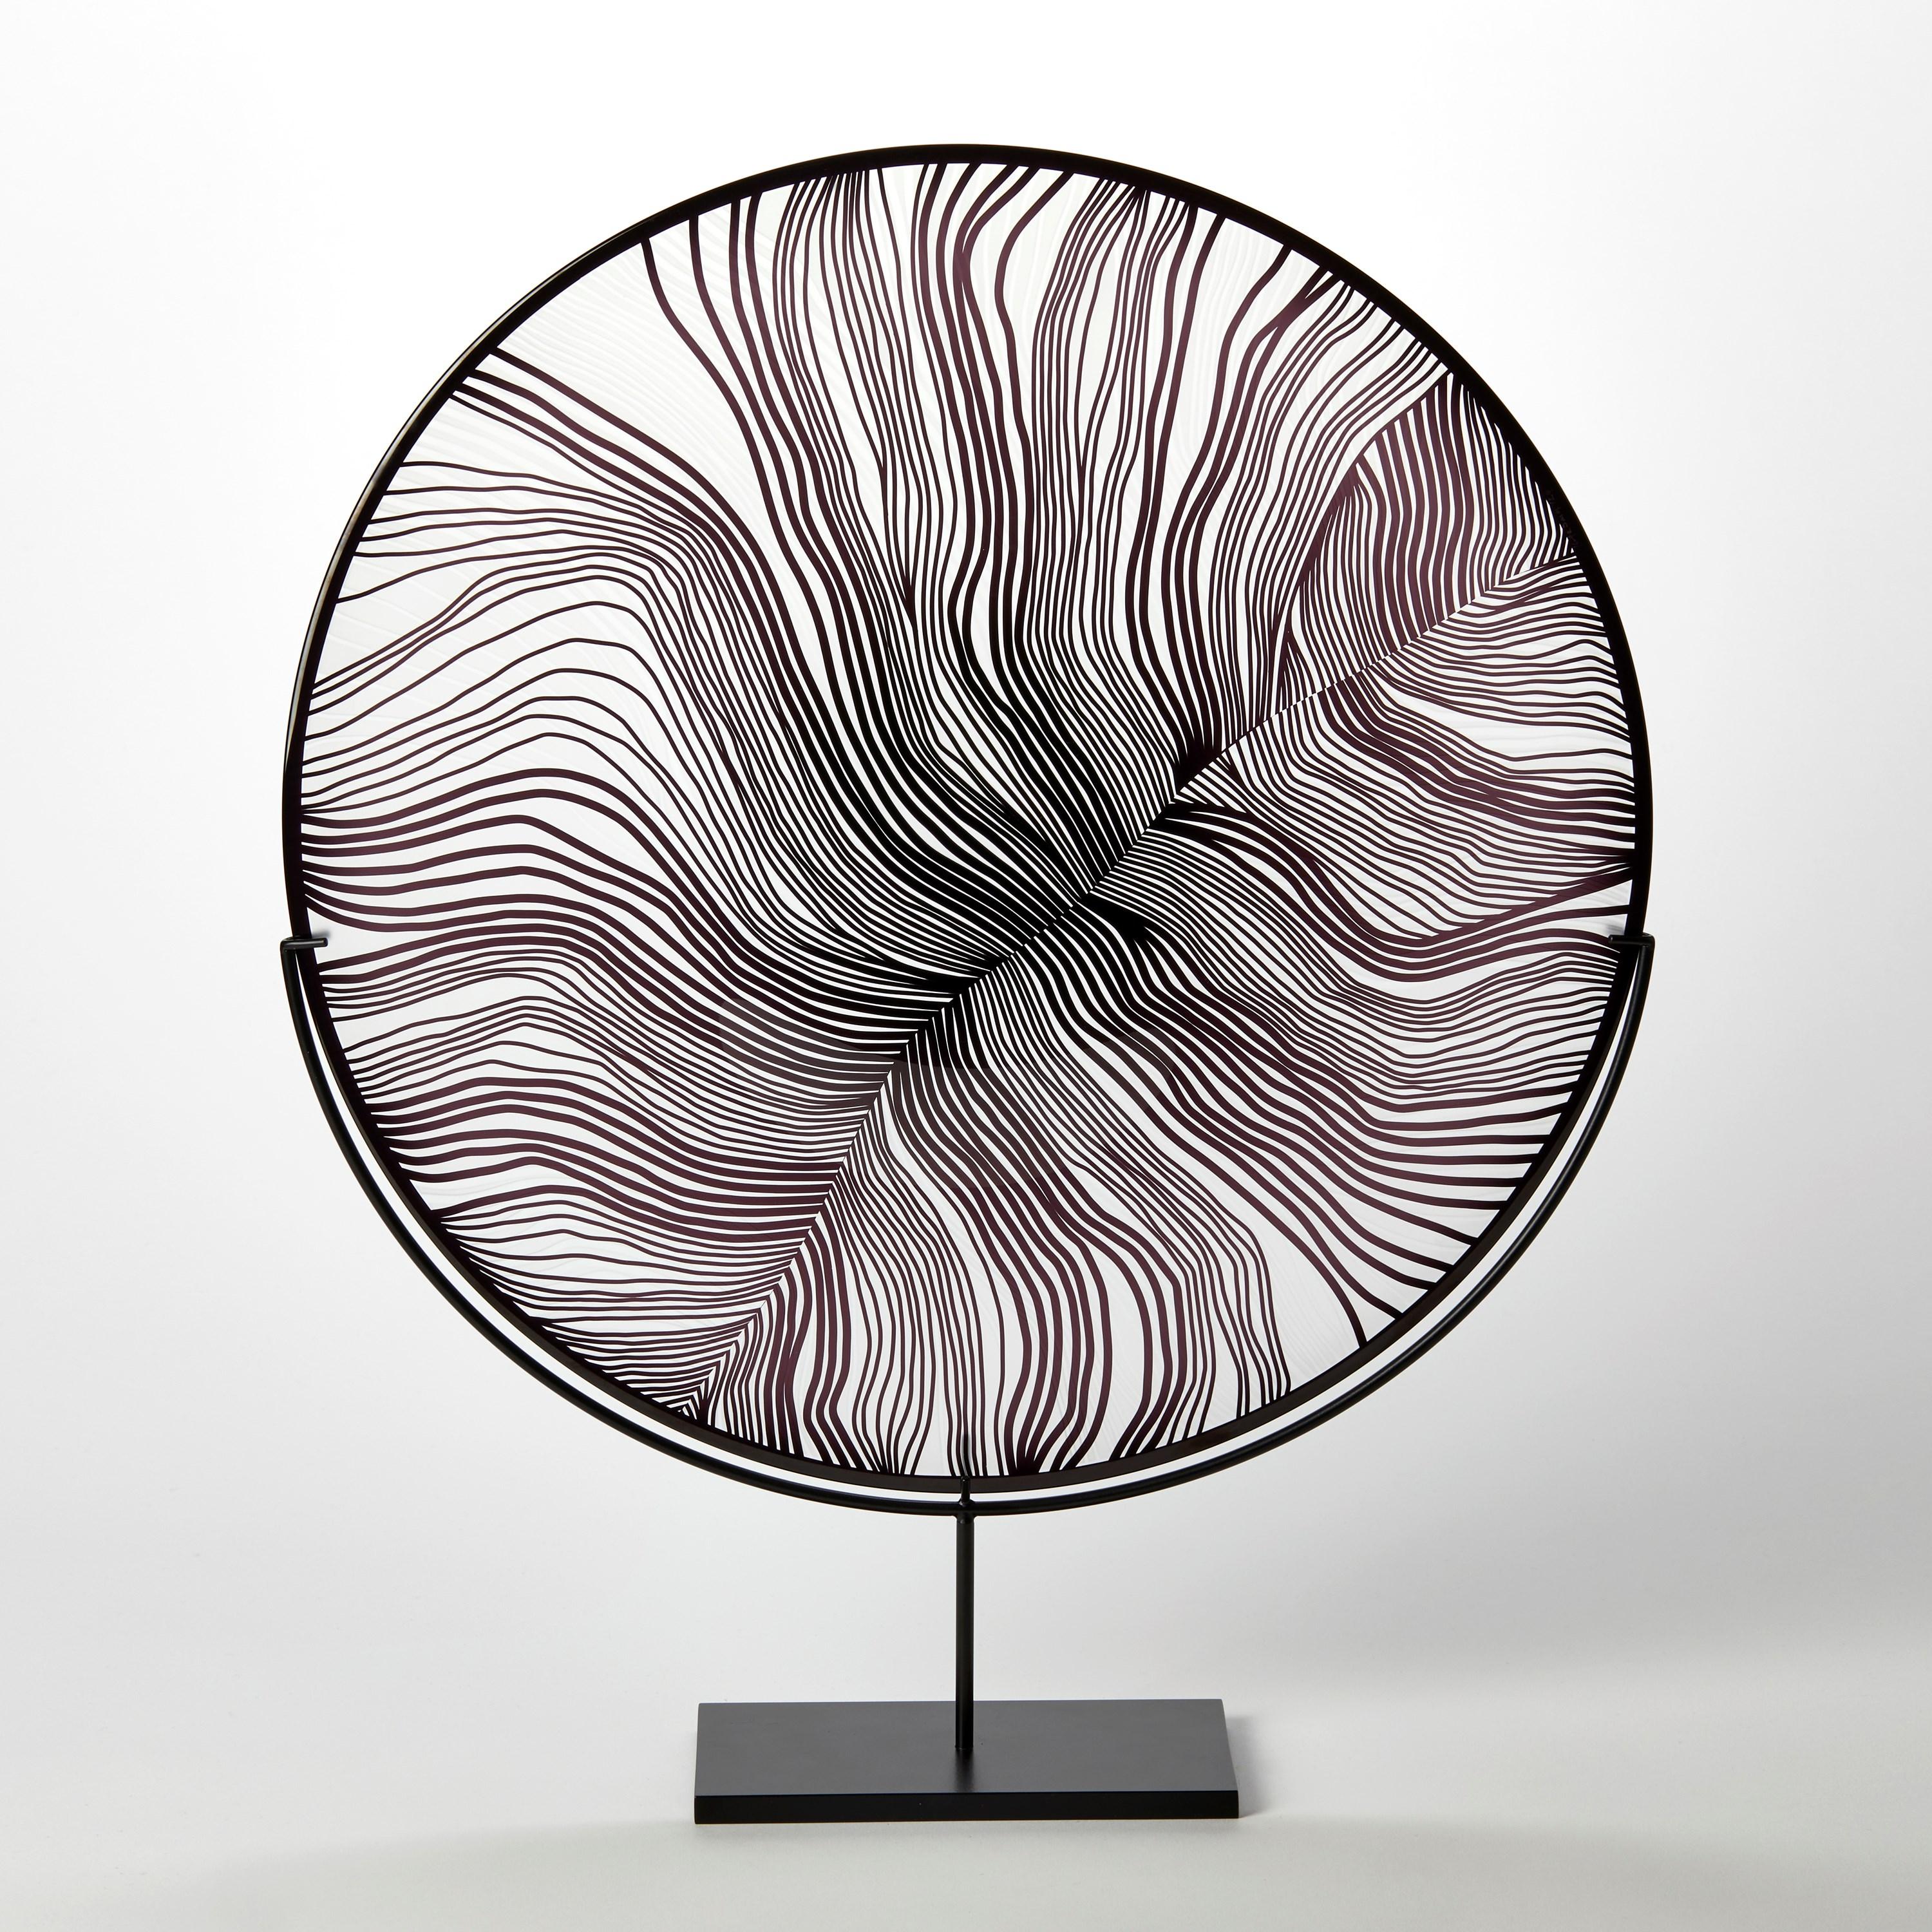 'Solar Storm Monochrome II' is a unique handblown and cut glass artwork by the British artist, Kate Jones of Gillies Jones.

Created with Stephen Gillies, with whom Jones makes many works in collaboration, these exquisite sculptural plates are